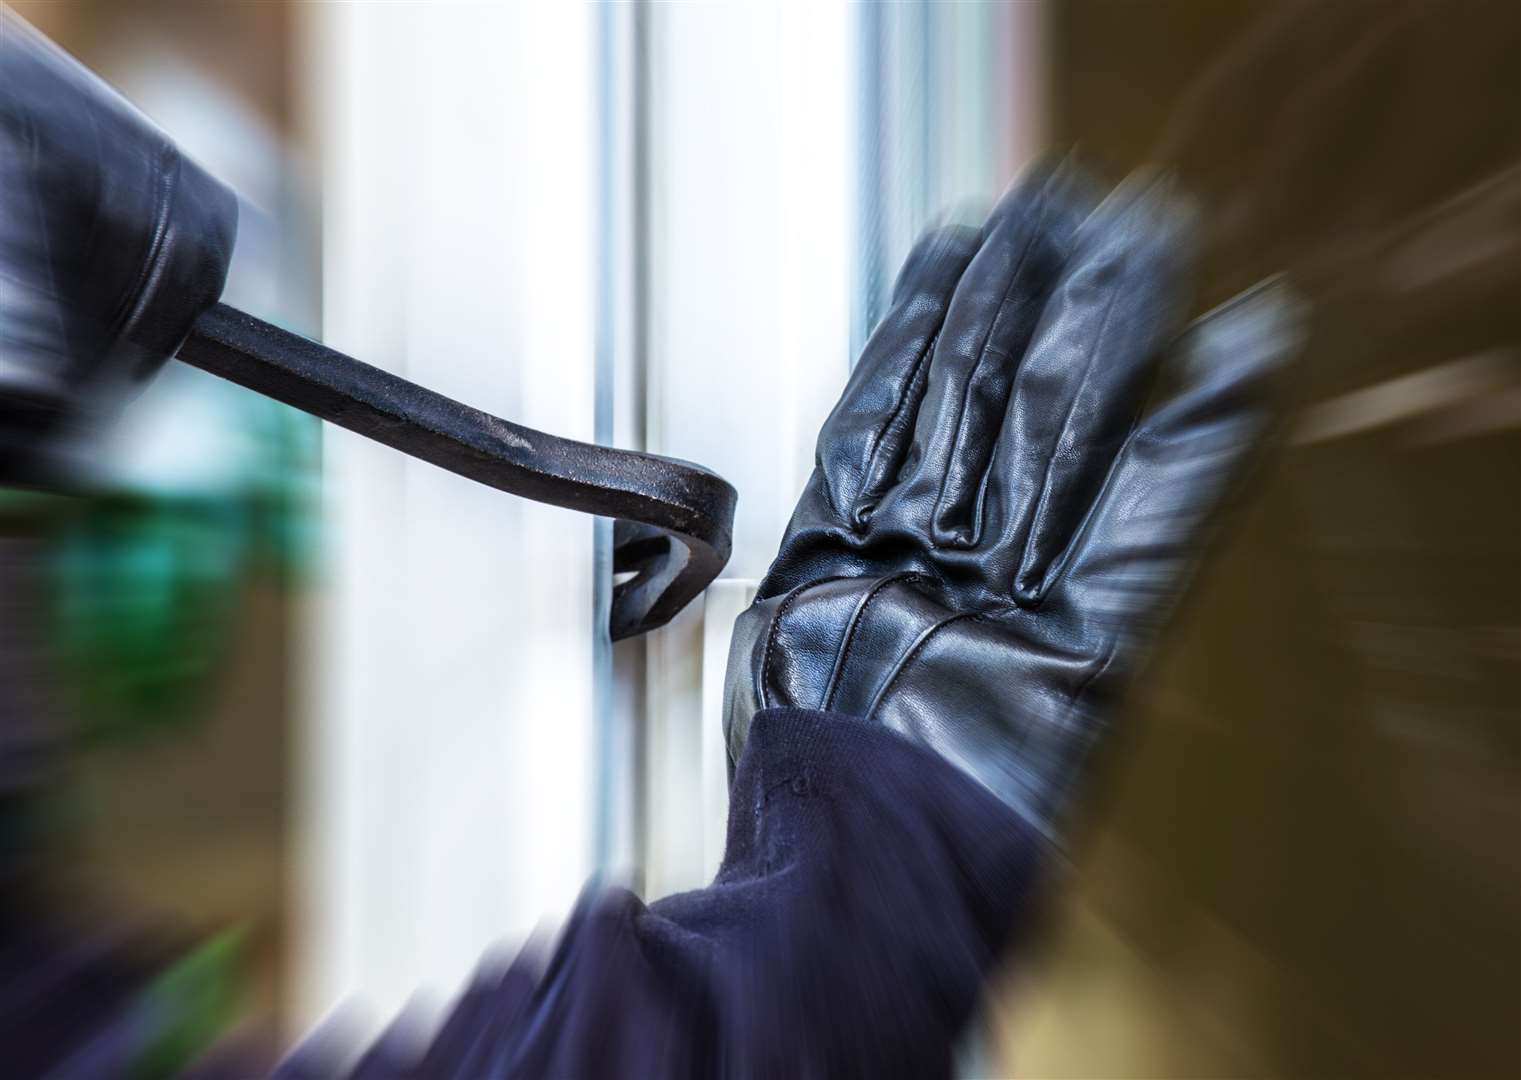 Find out how many burglaries in Kent went unsolved